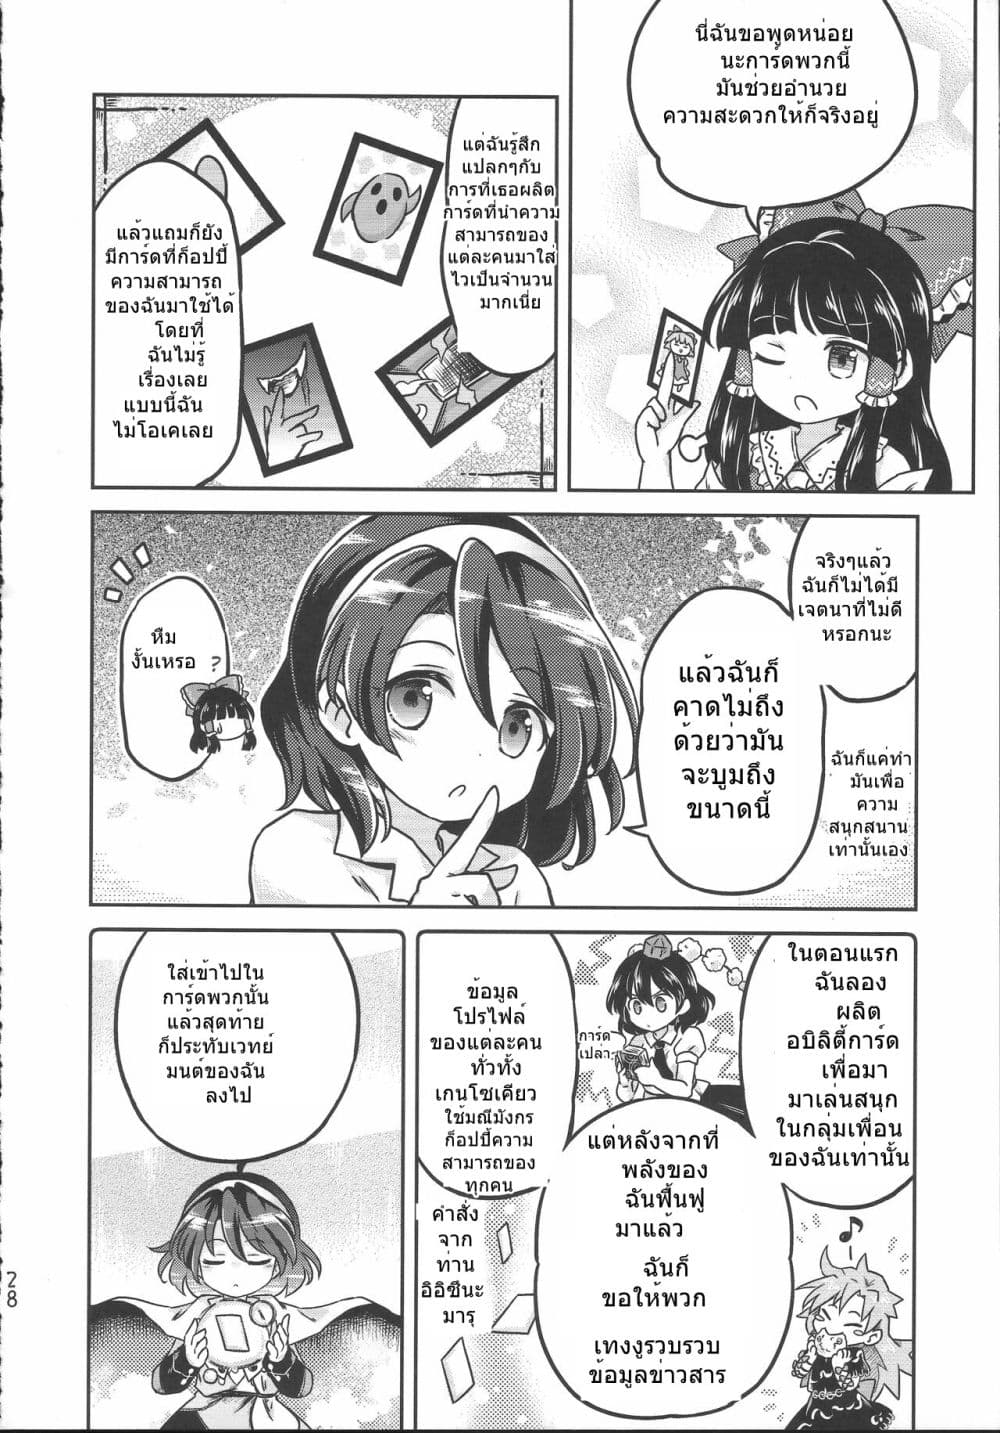 Touhou Project Chima Book By Pote ตอนที่ 1 (27)